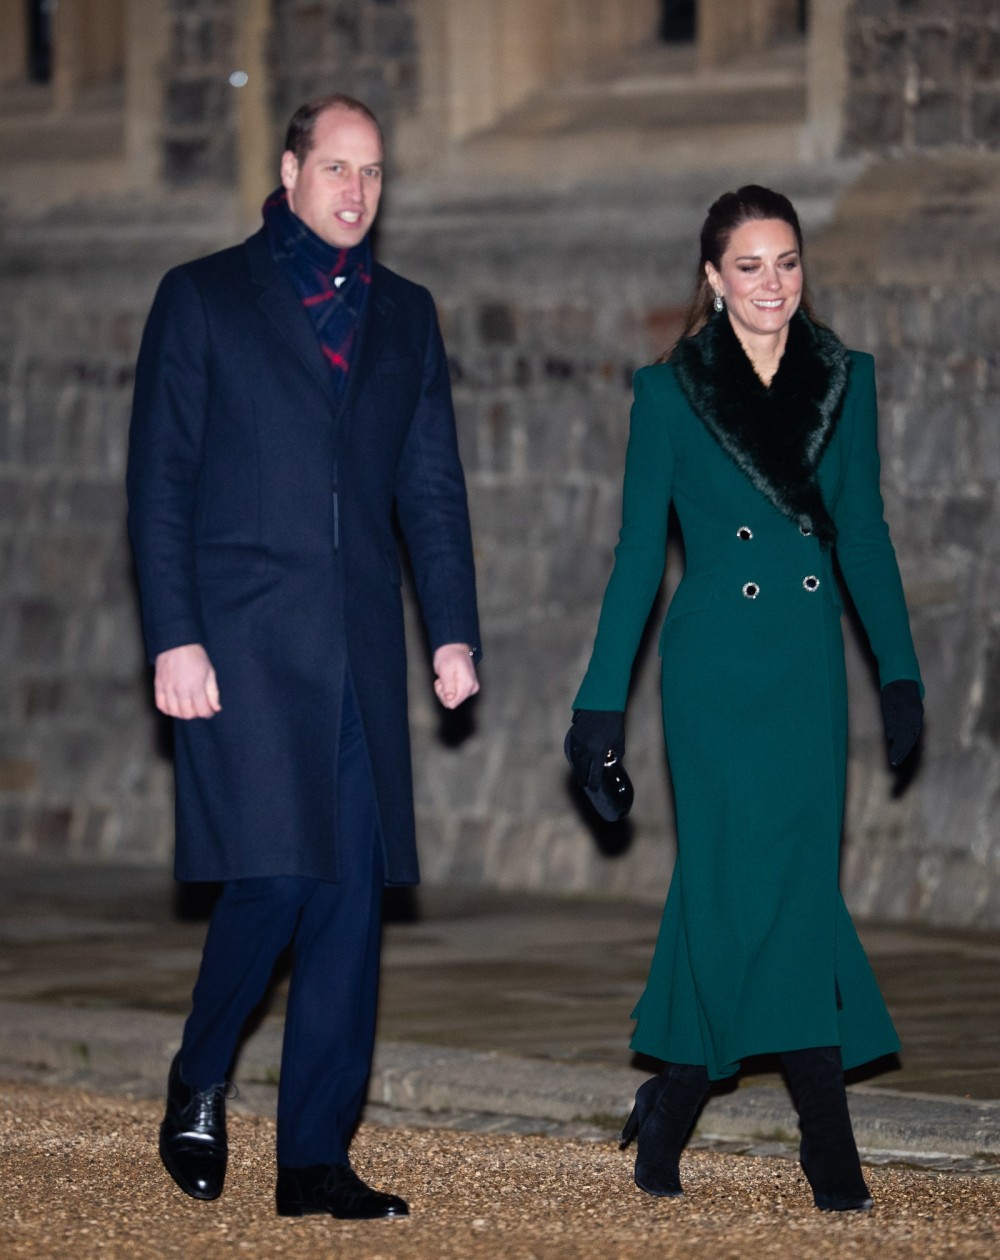 Kate Middleton's JewelTone Outfits